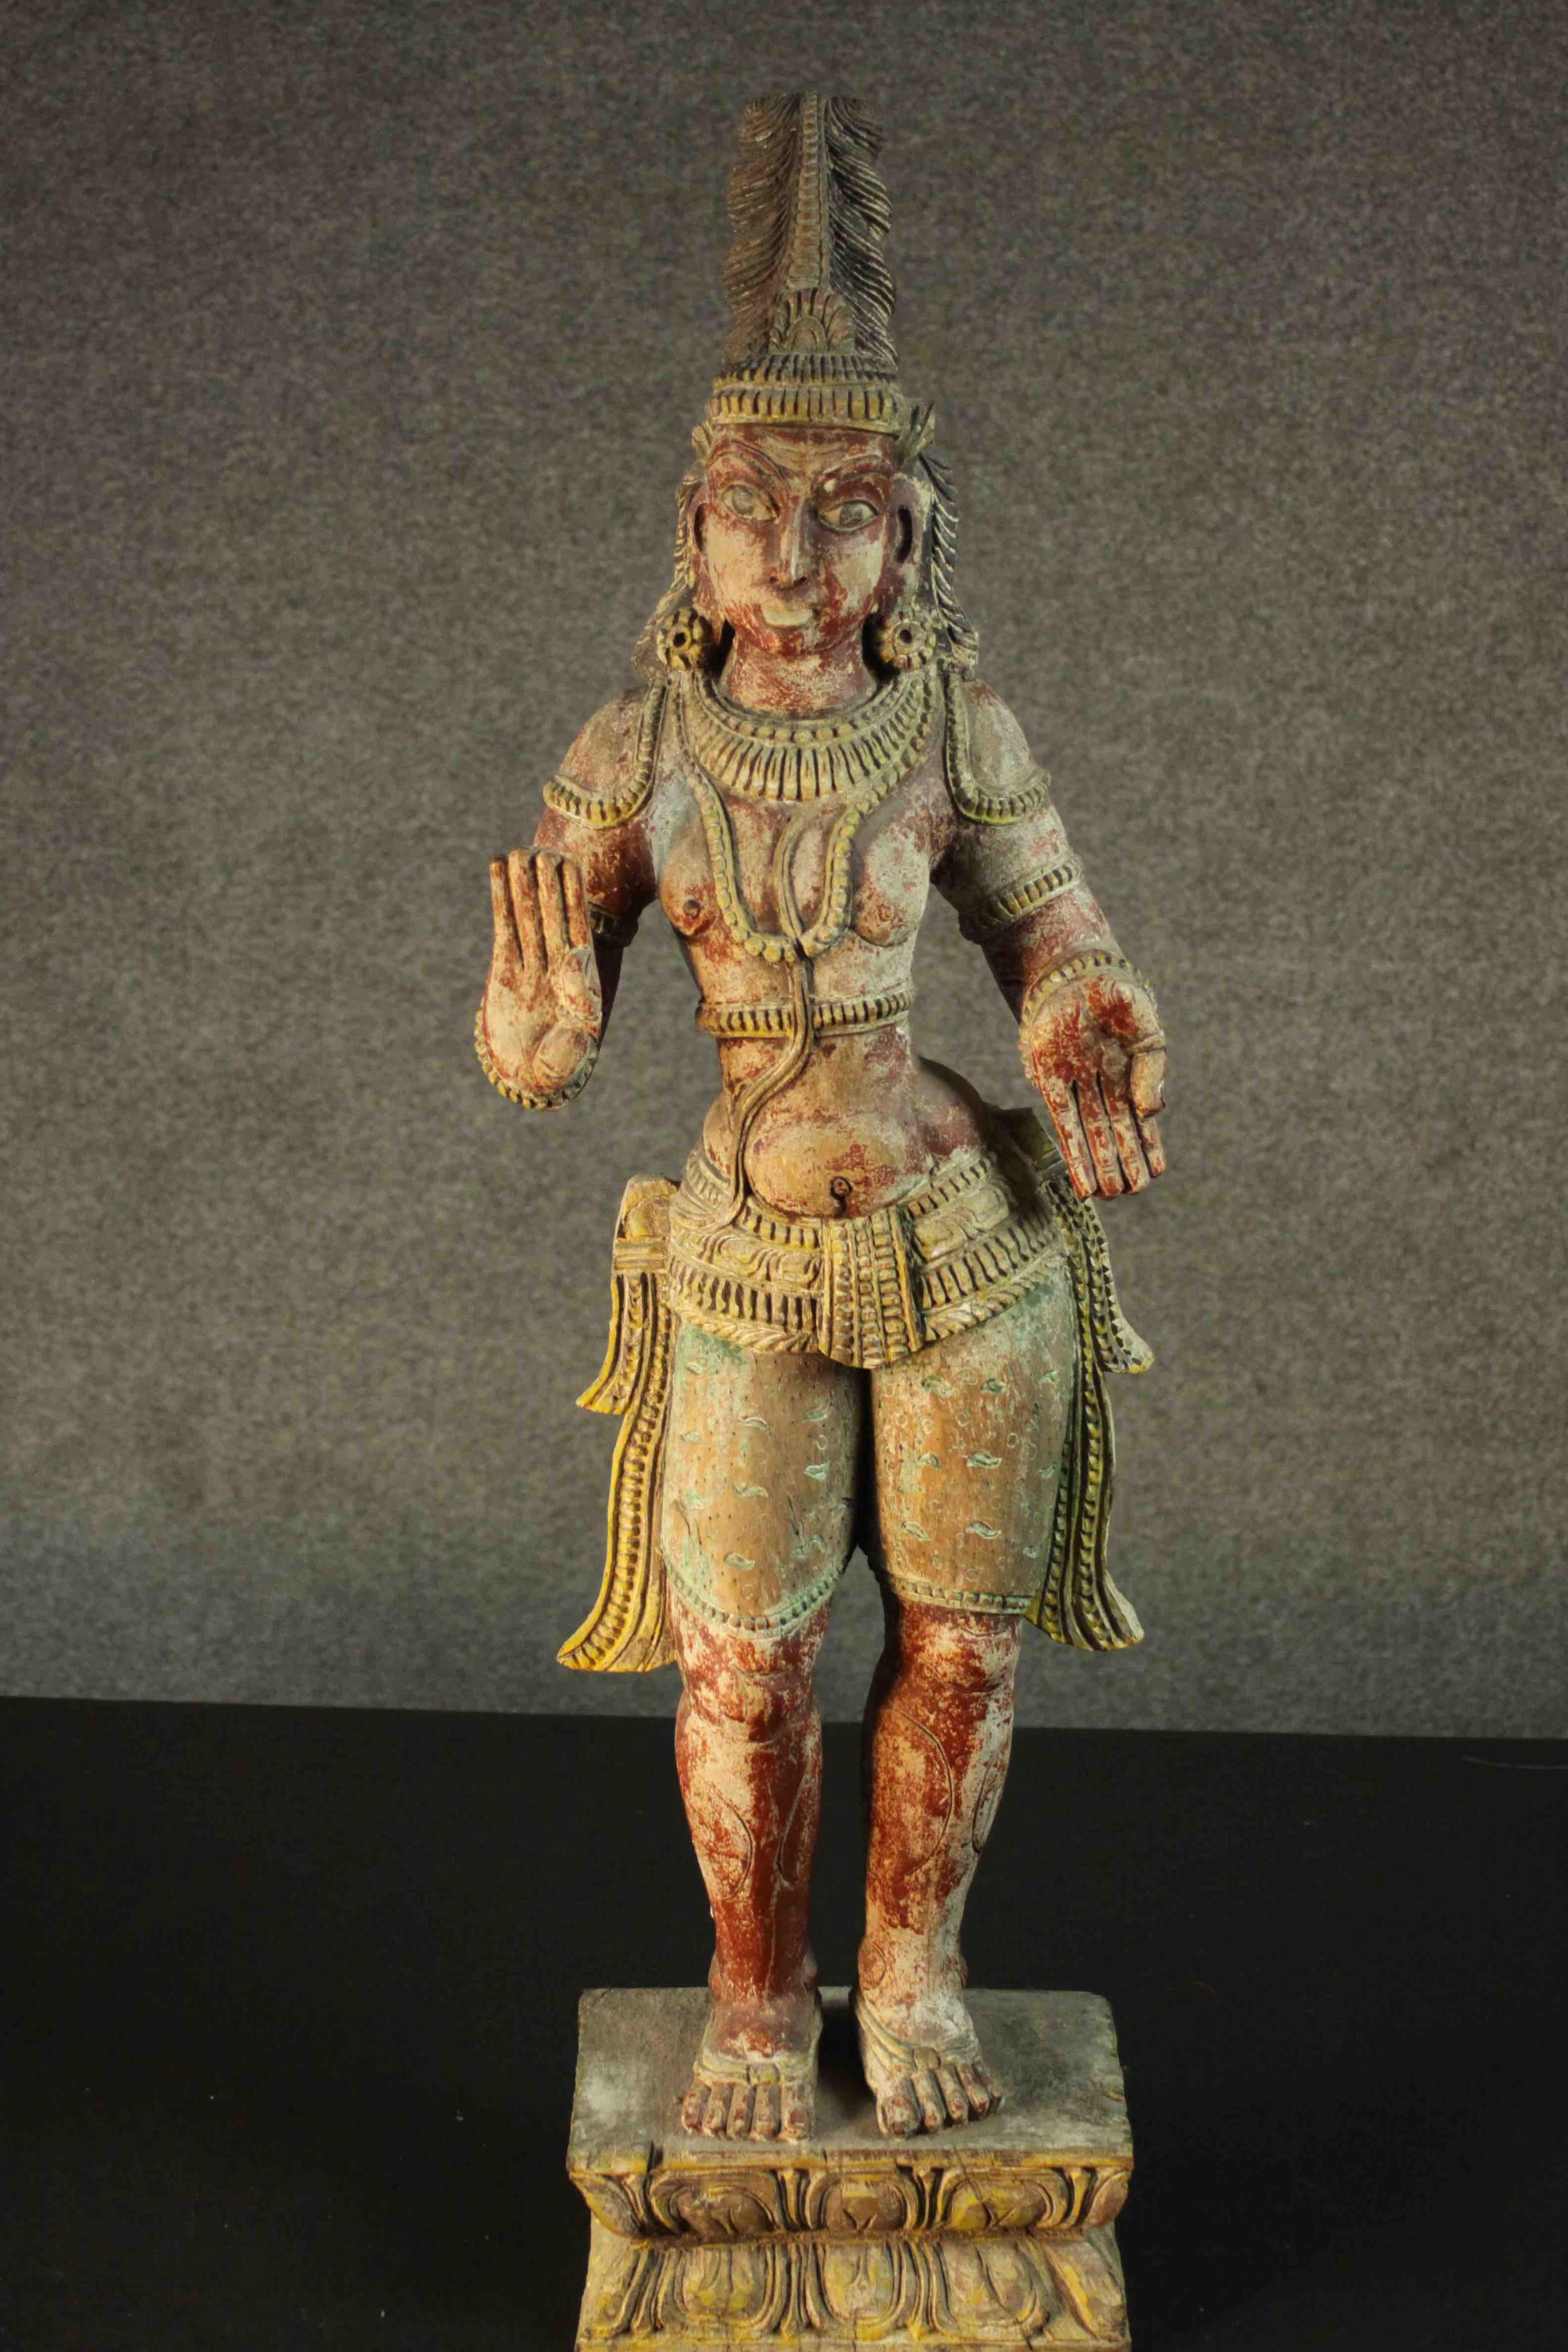 A large carved and painted 19th century Oriental statue of a deity standing on a rectangular lotus